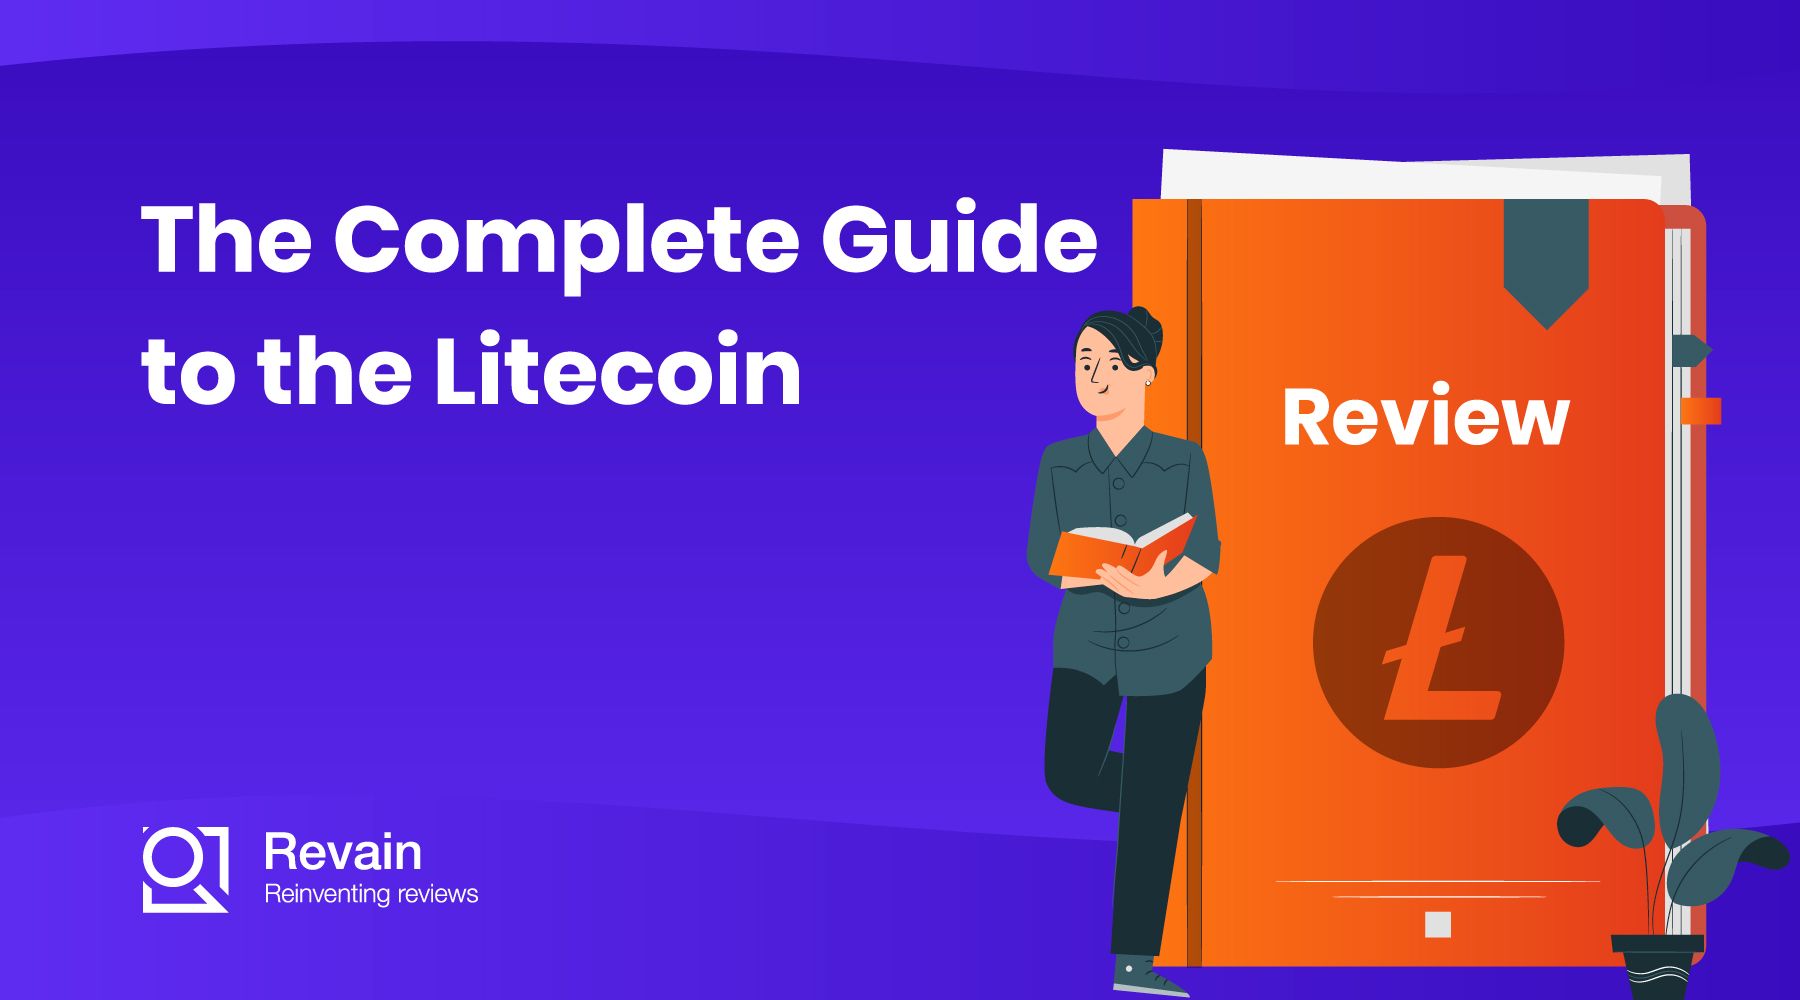 The Complete Guide to the Litecoin